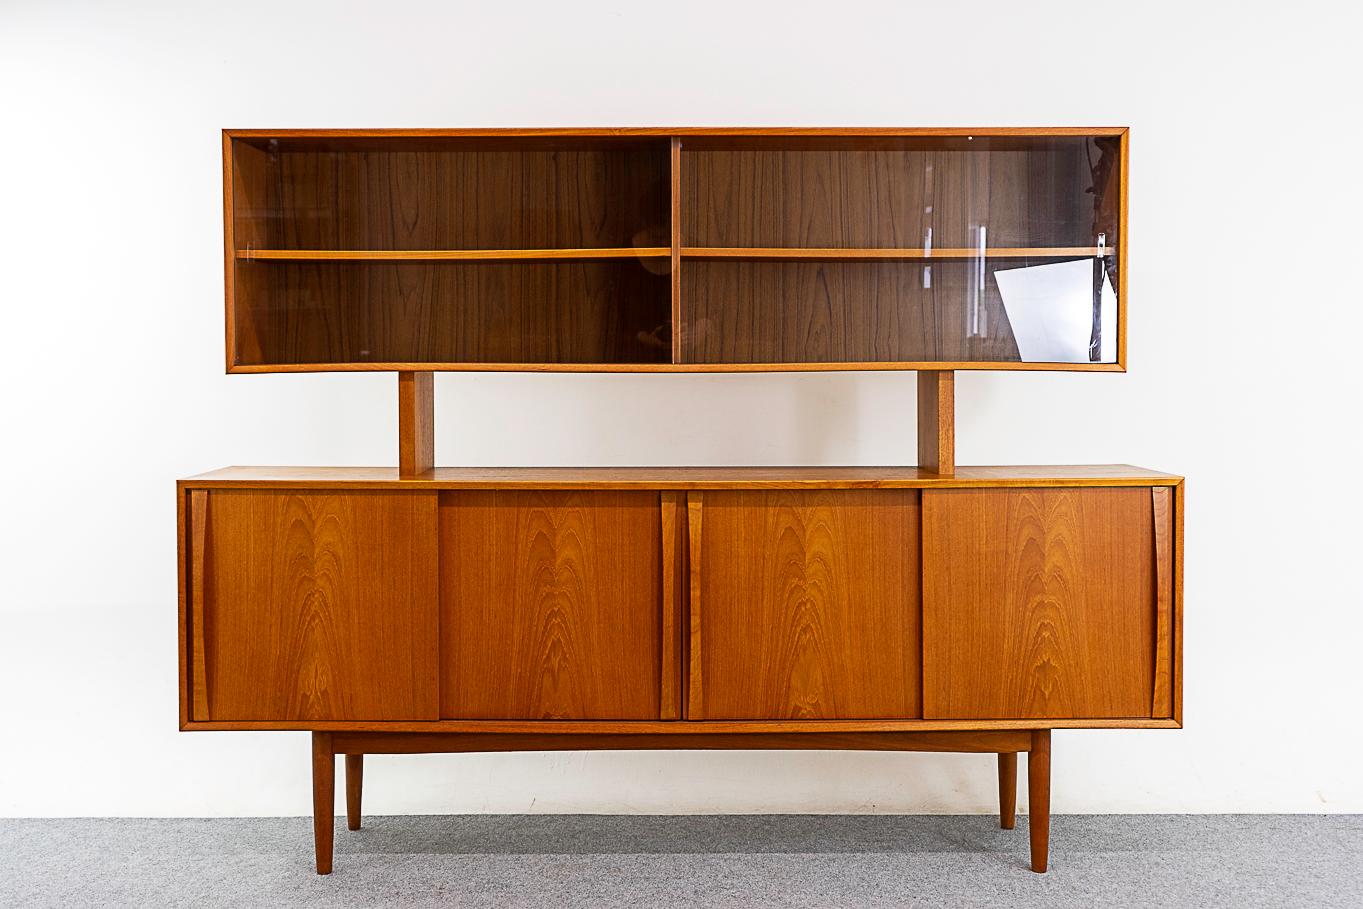 Teak Danish sideboard & hutch, circa 1960's. Beautiful bookmatched veneer, solid wood edging, elegant handles and sleek tapered legs. Spacious interior with height adjustable shelving and slender dove tailed felt lined drawers with solid teak